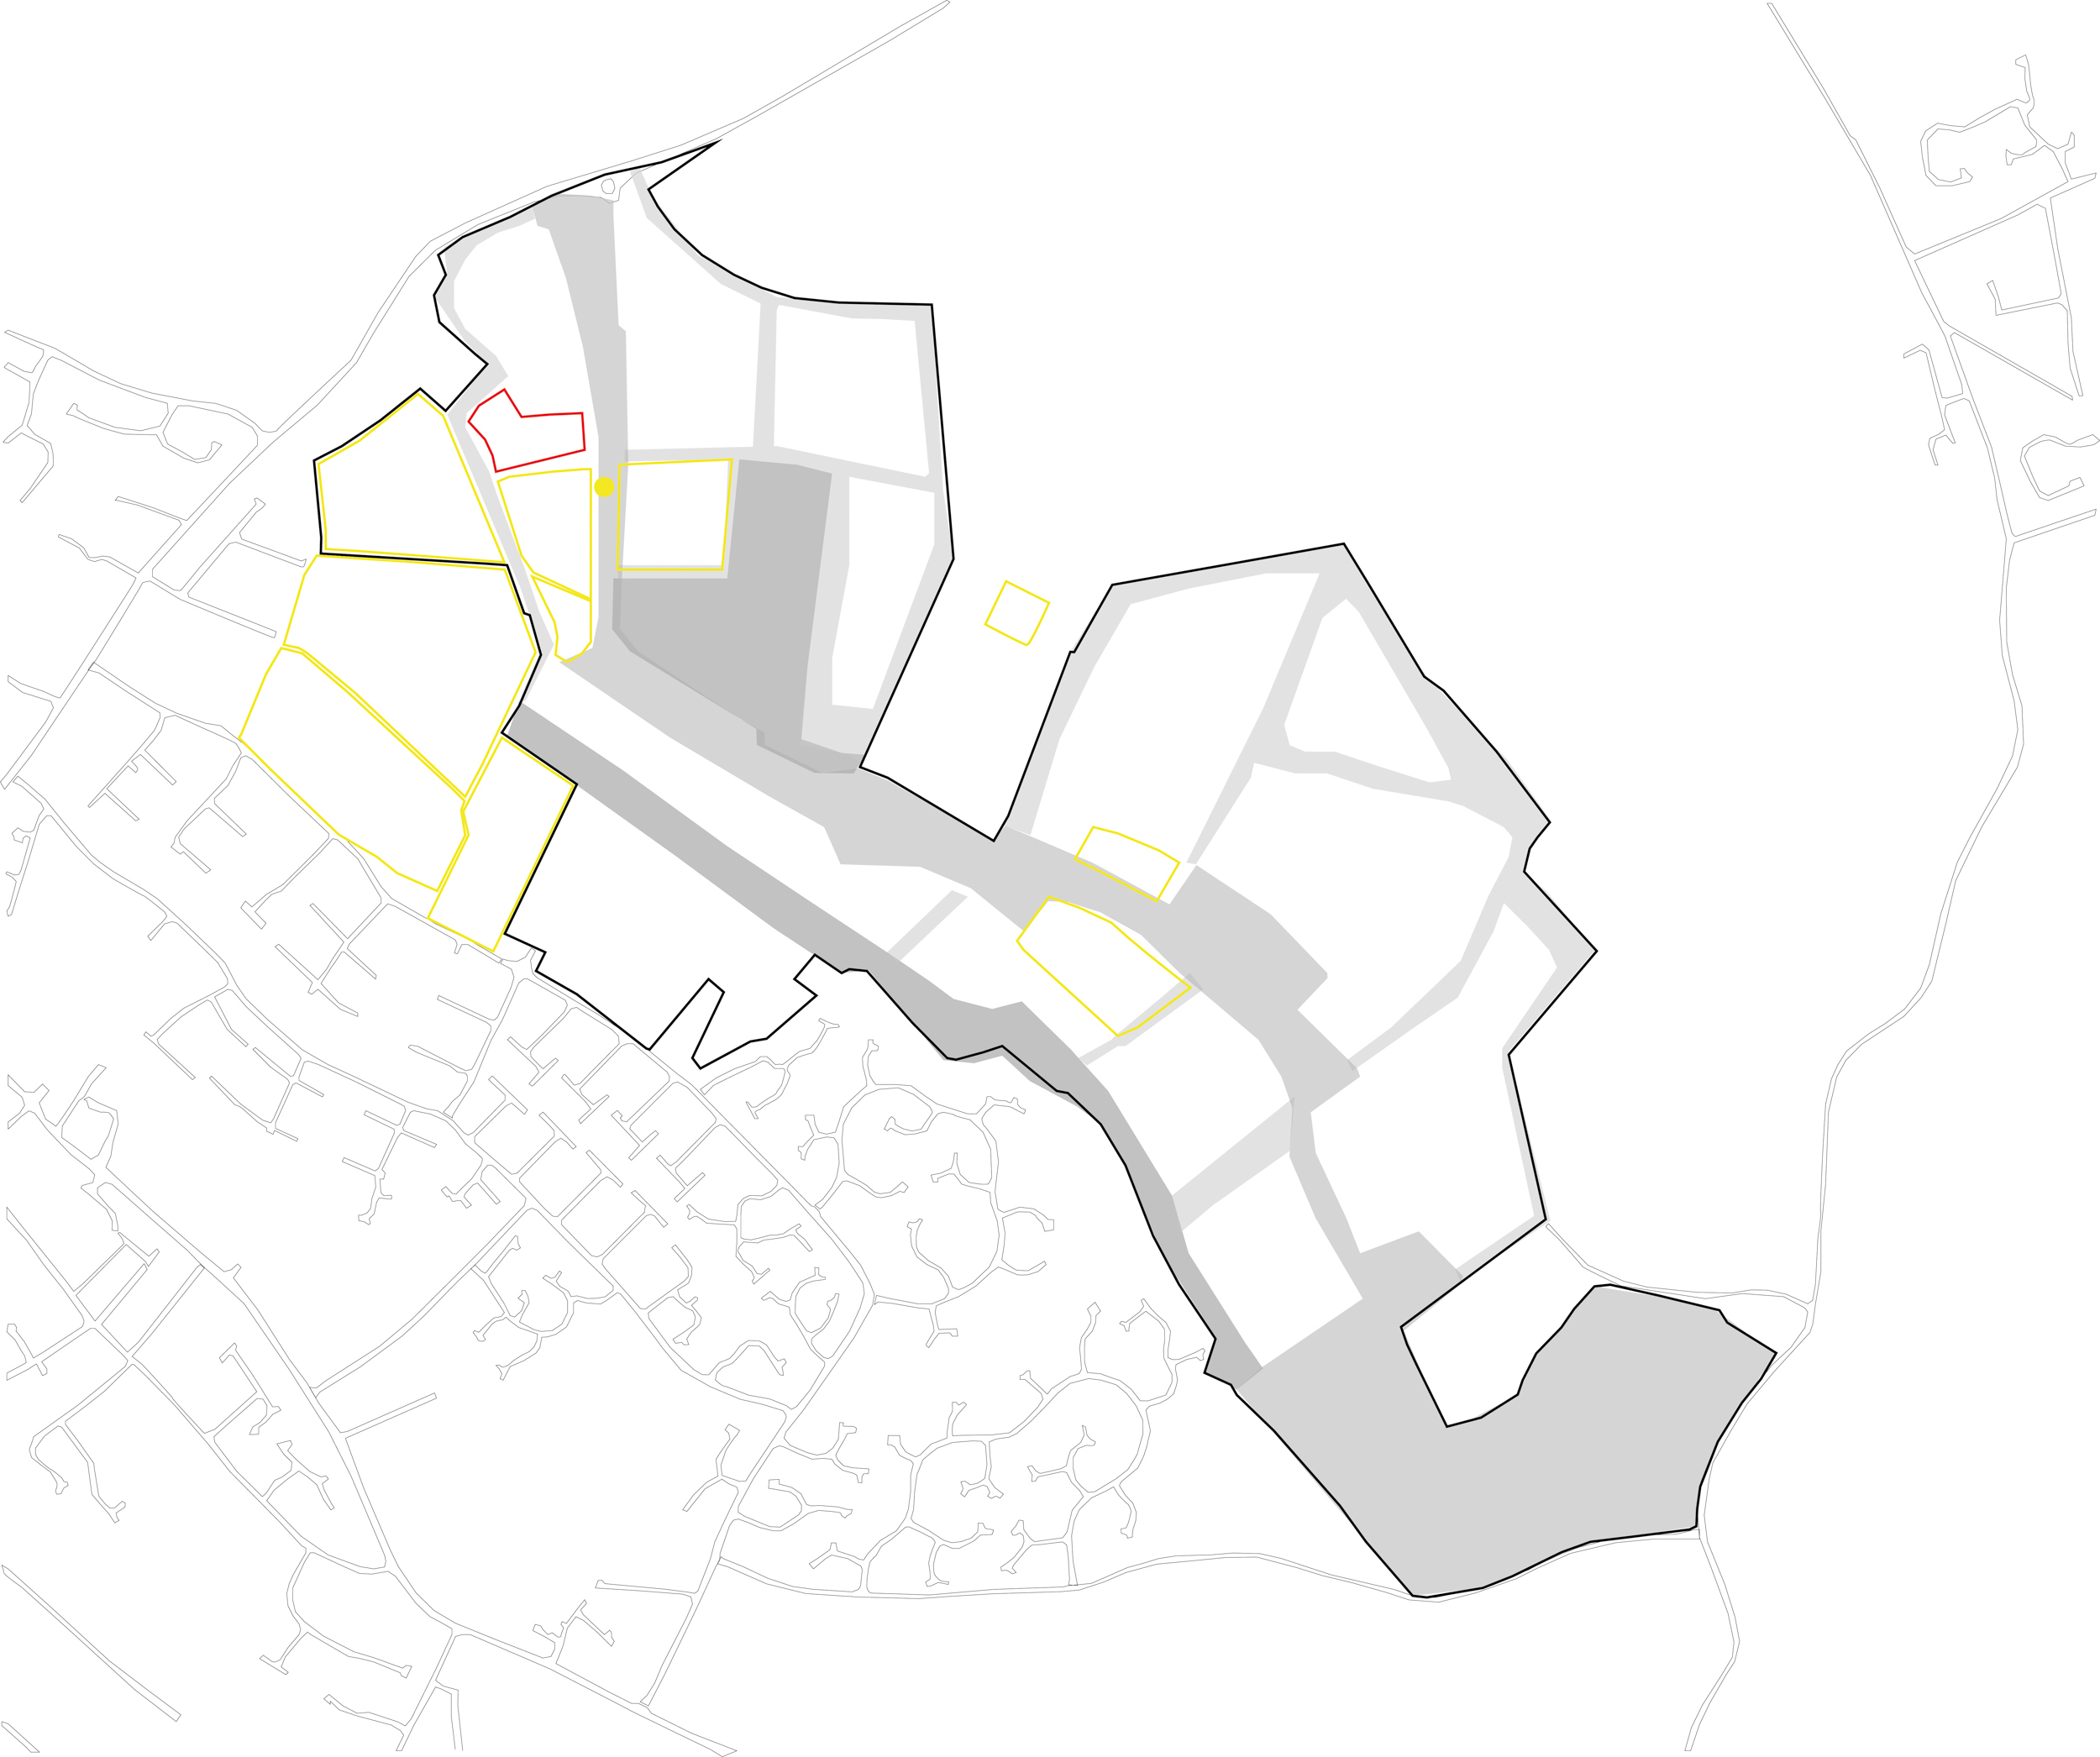 Site Analysis diagram showing local sites of importance | Cambridge architects CDC Studio